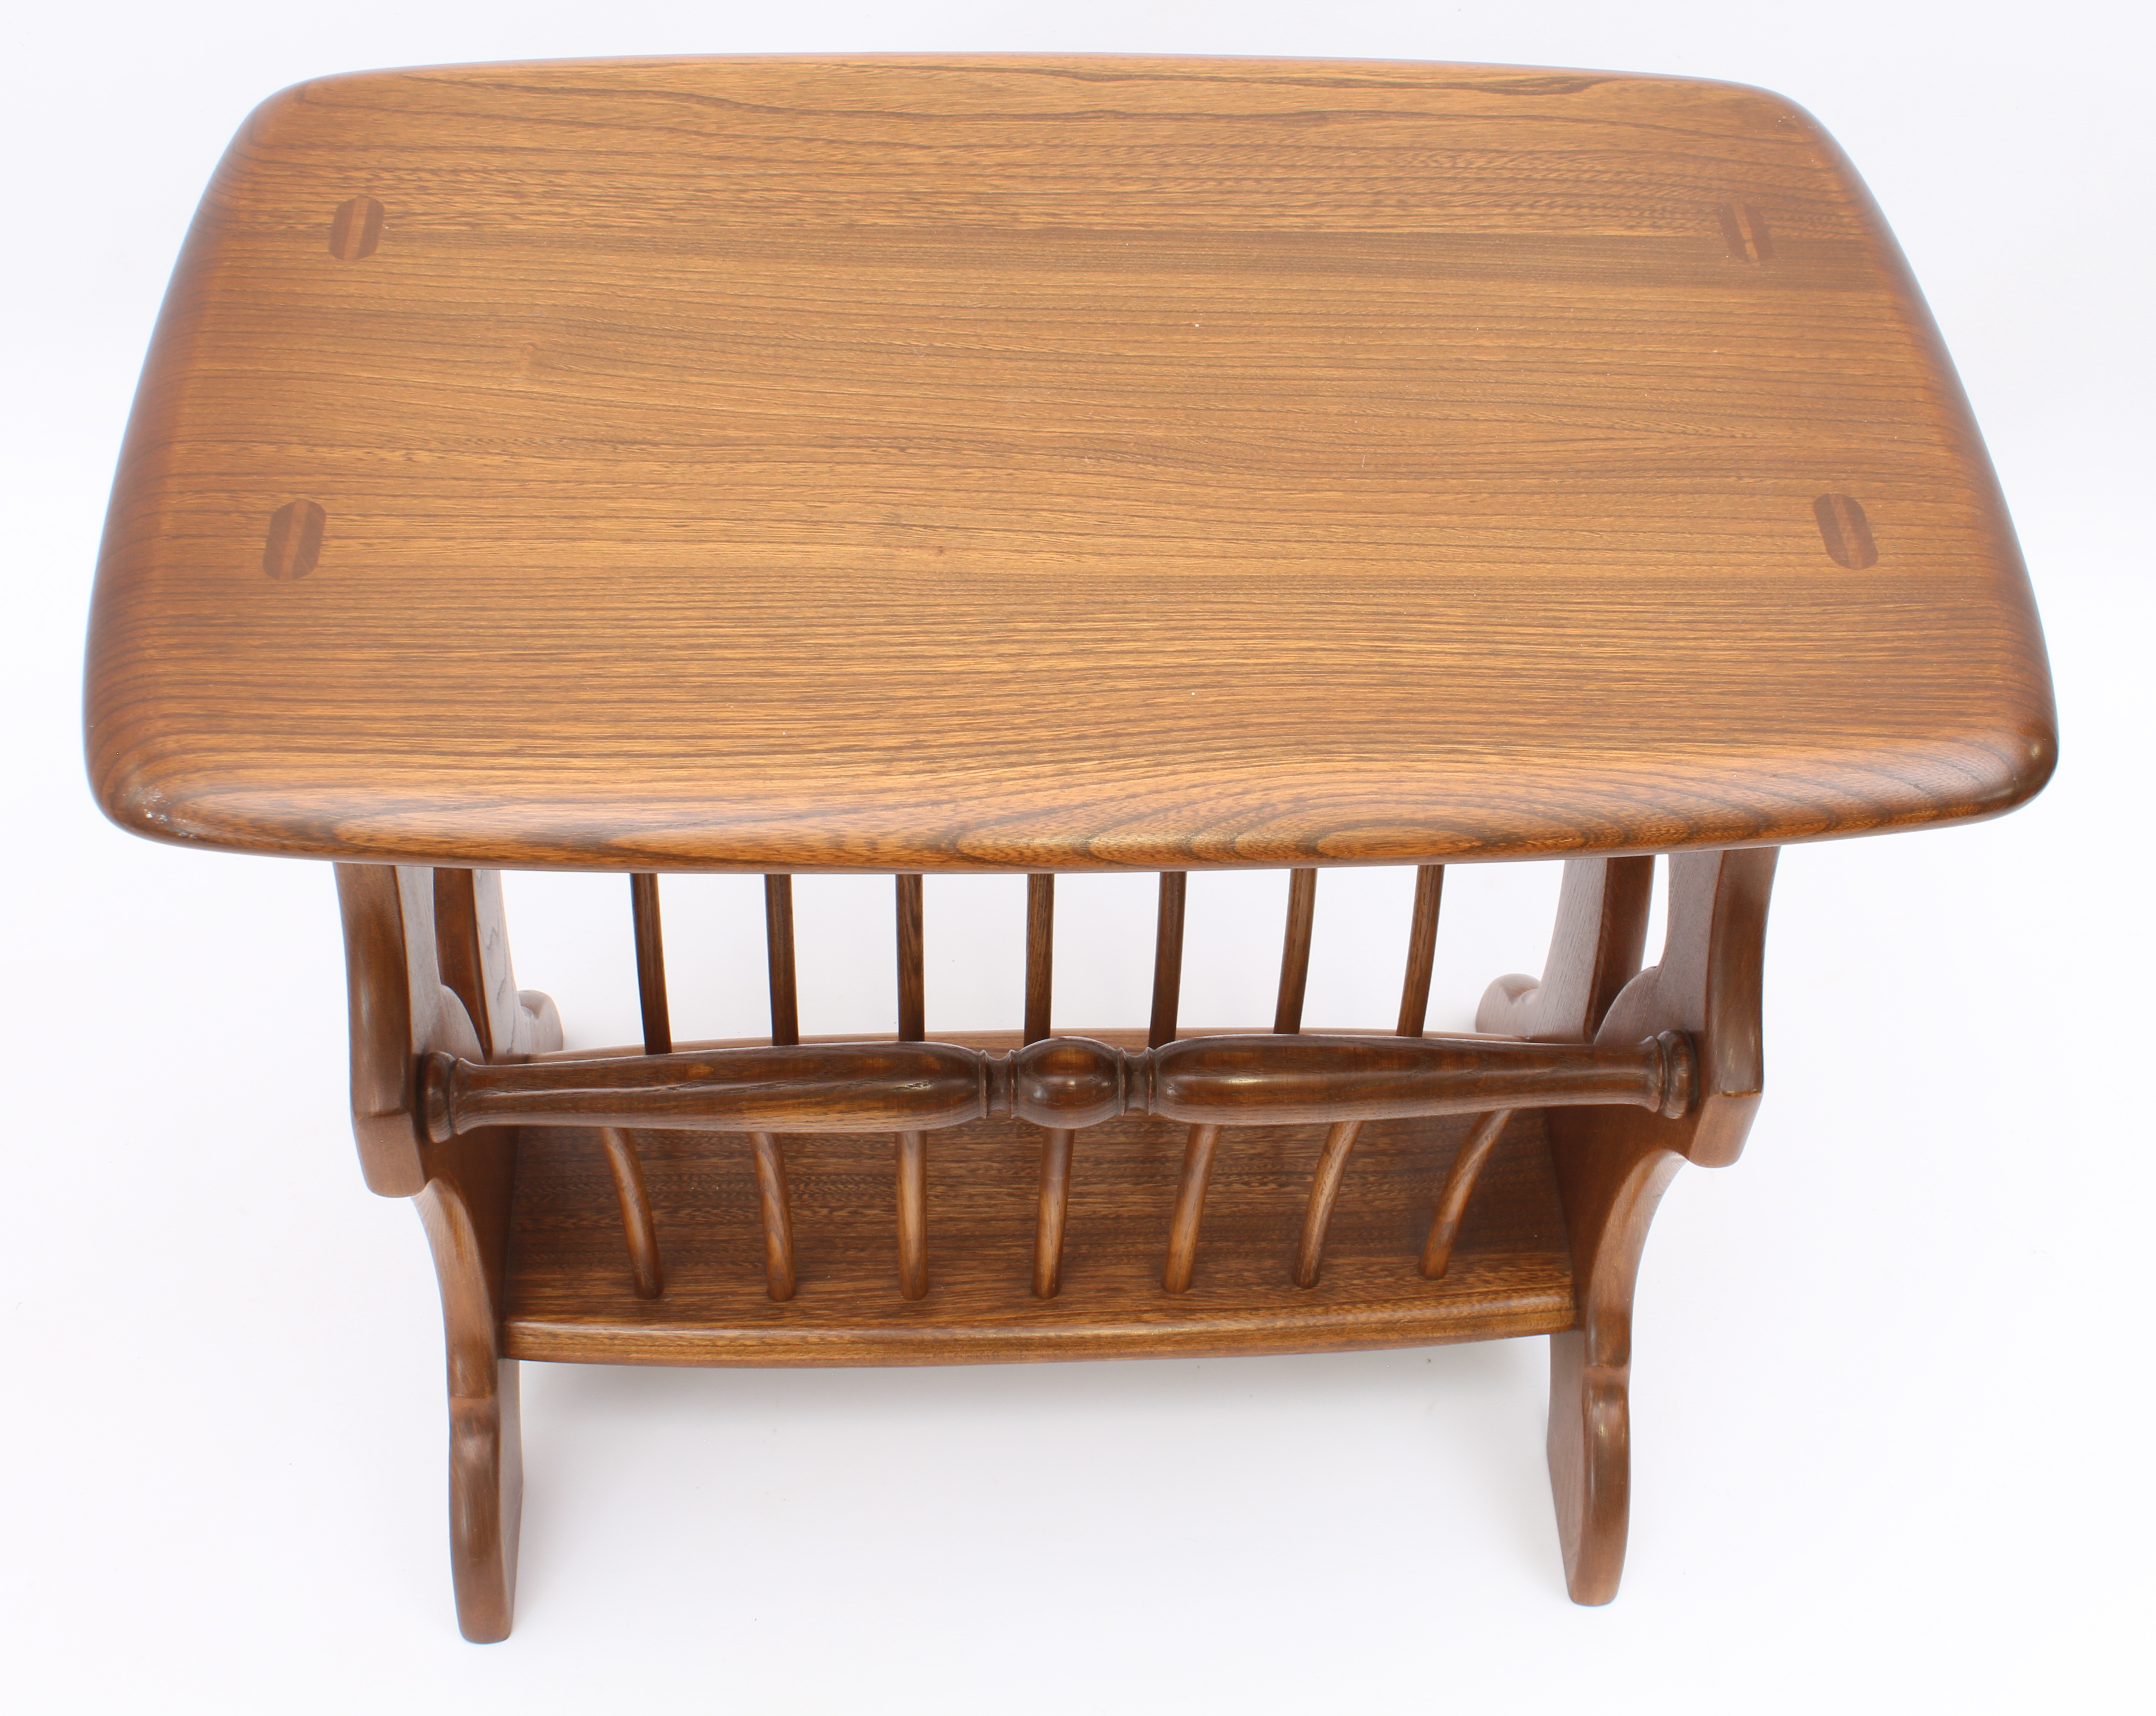 An Ercol Windsor Canterbury or magazine rack table - original maker's labels to underside (LWH 55 - Image 2 of 5